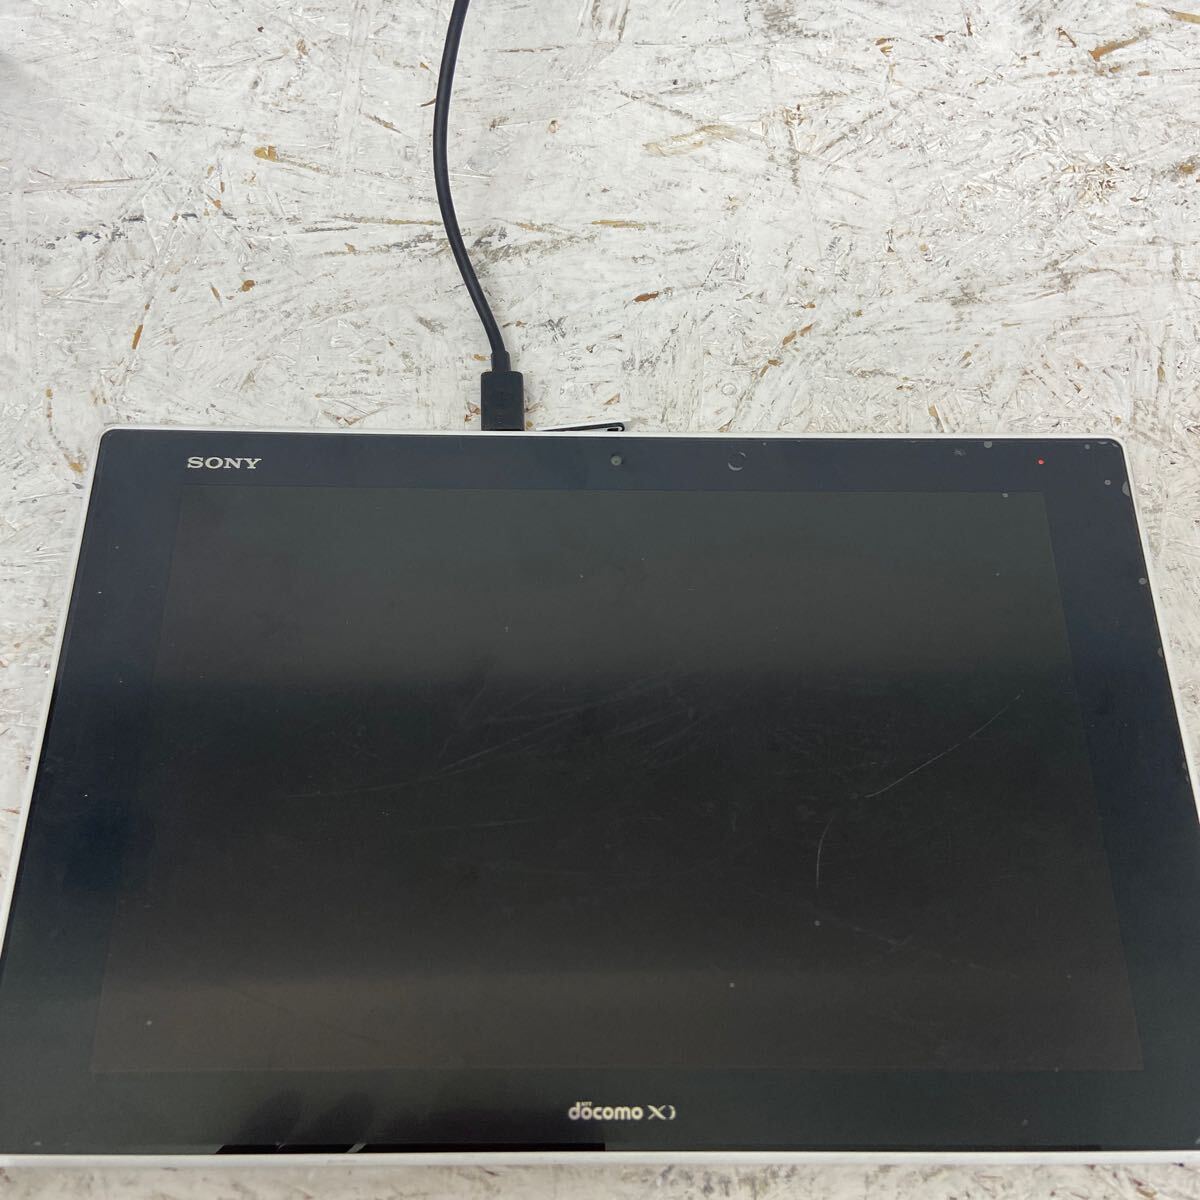 8 SONY ソニー XPERIA Z2 タブレット SO-05F 判定◯ 初期化済み Xperia Tablet タブレット_画像1